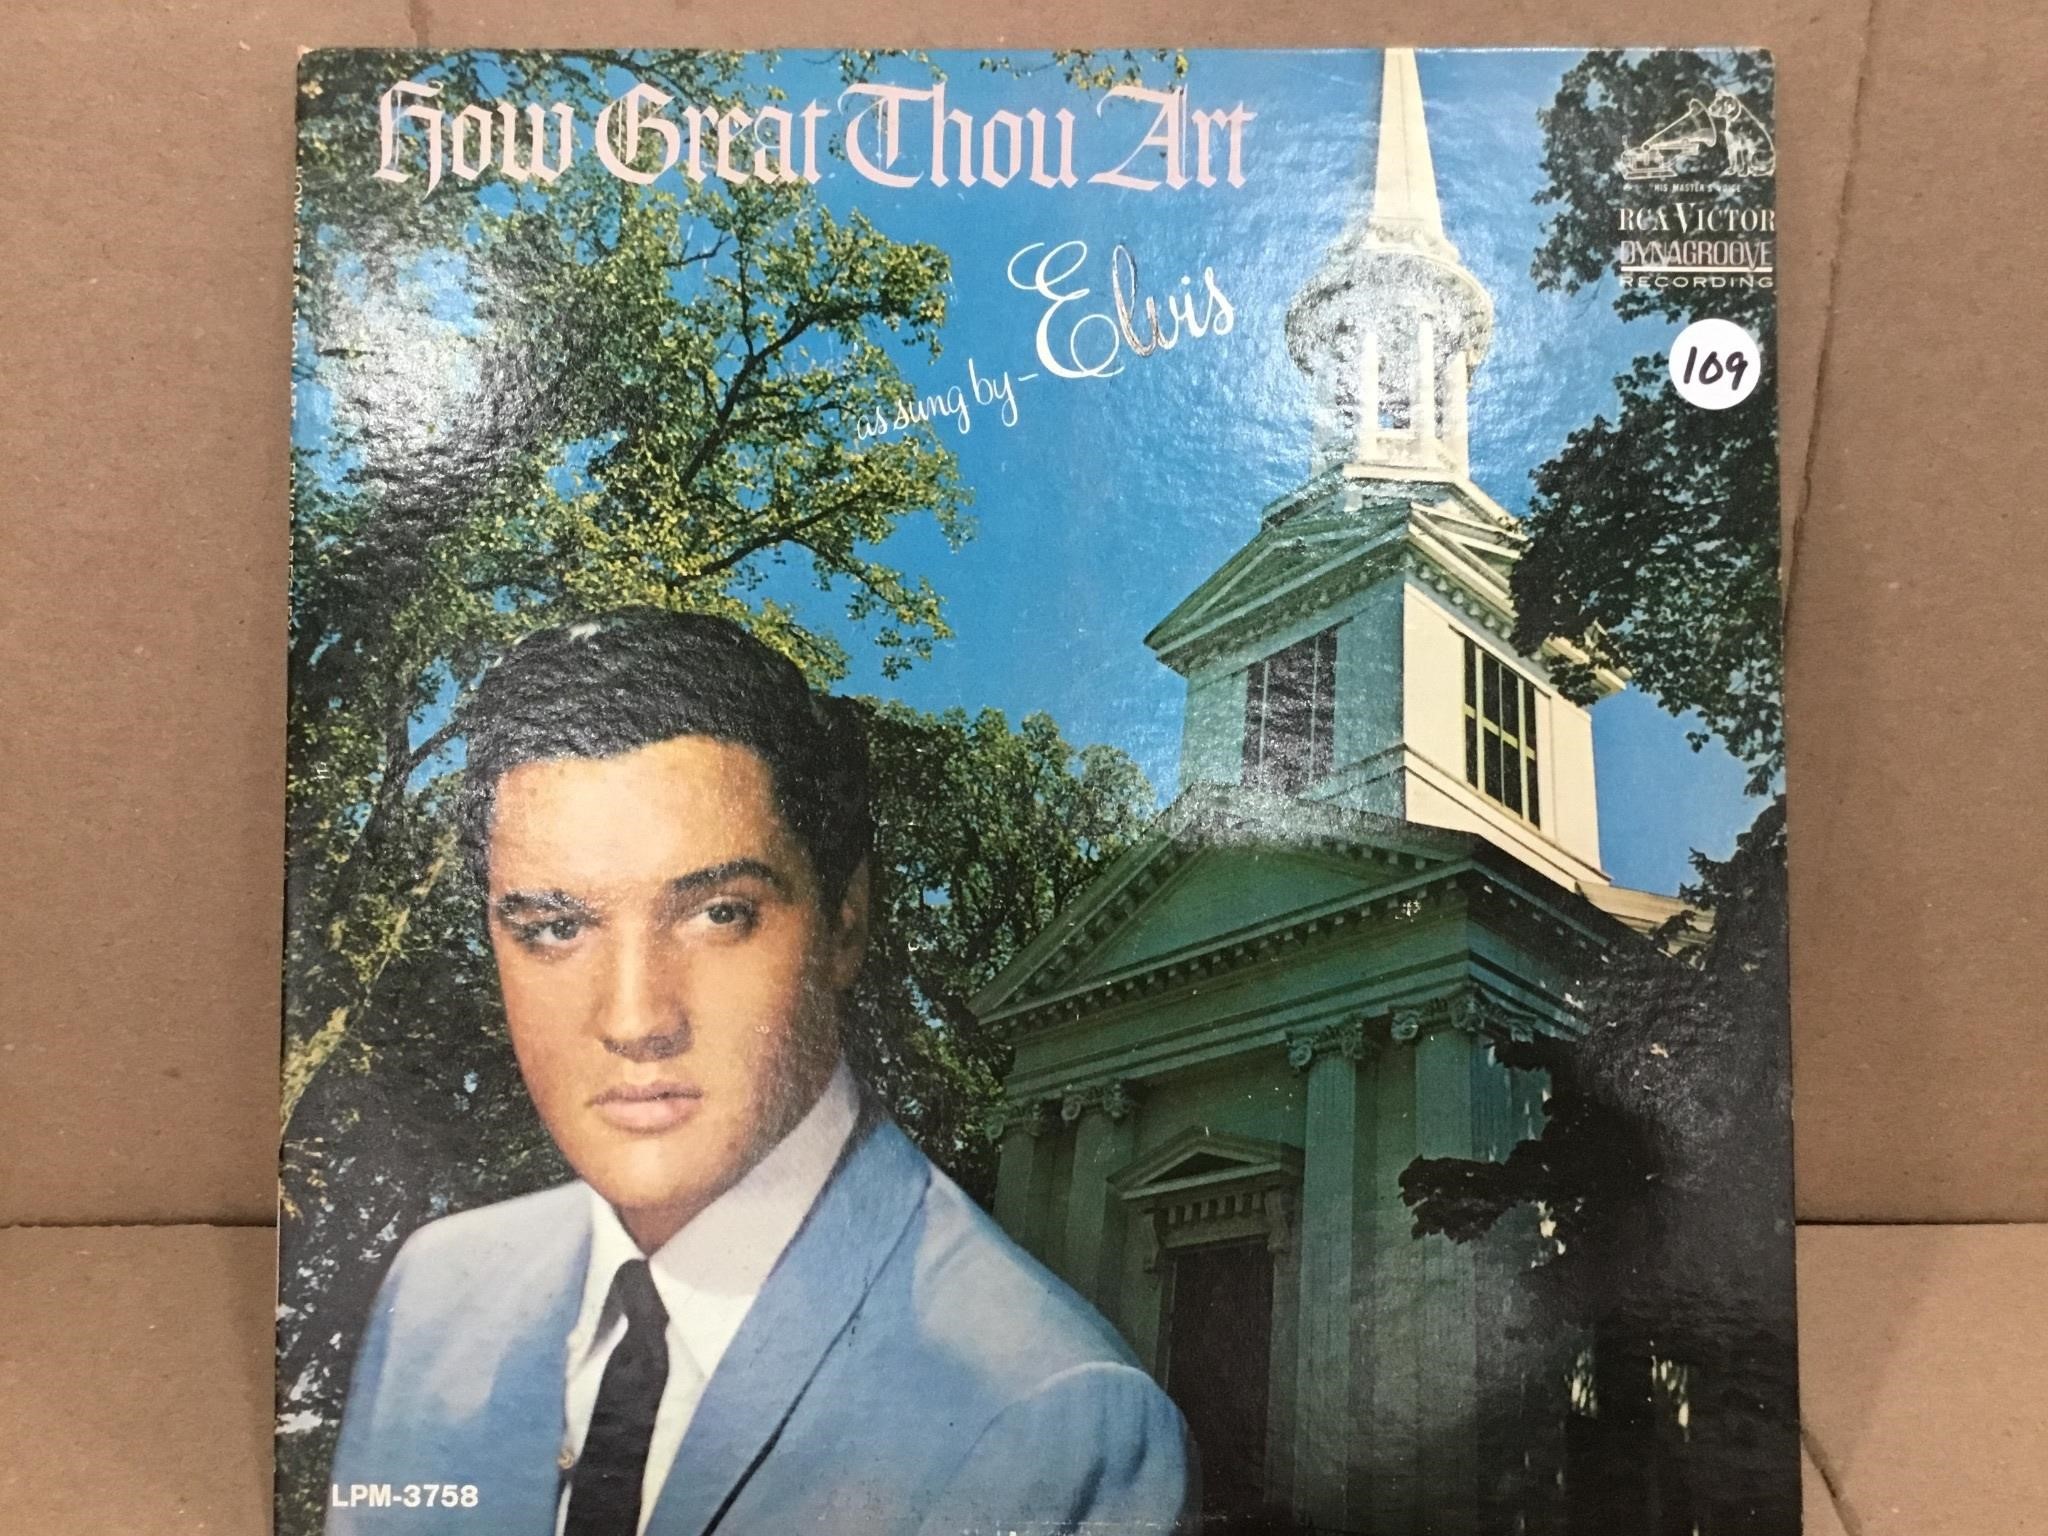 1967 Elvis "How Great Thou Art" Record